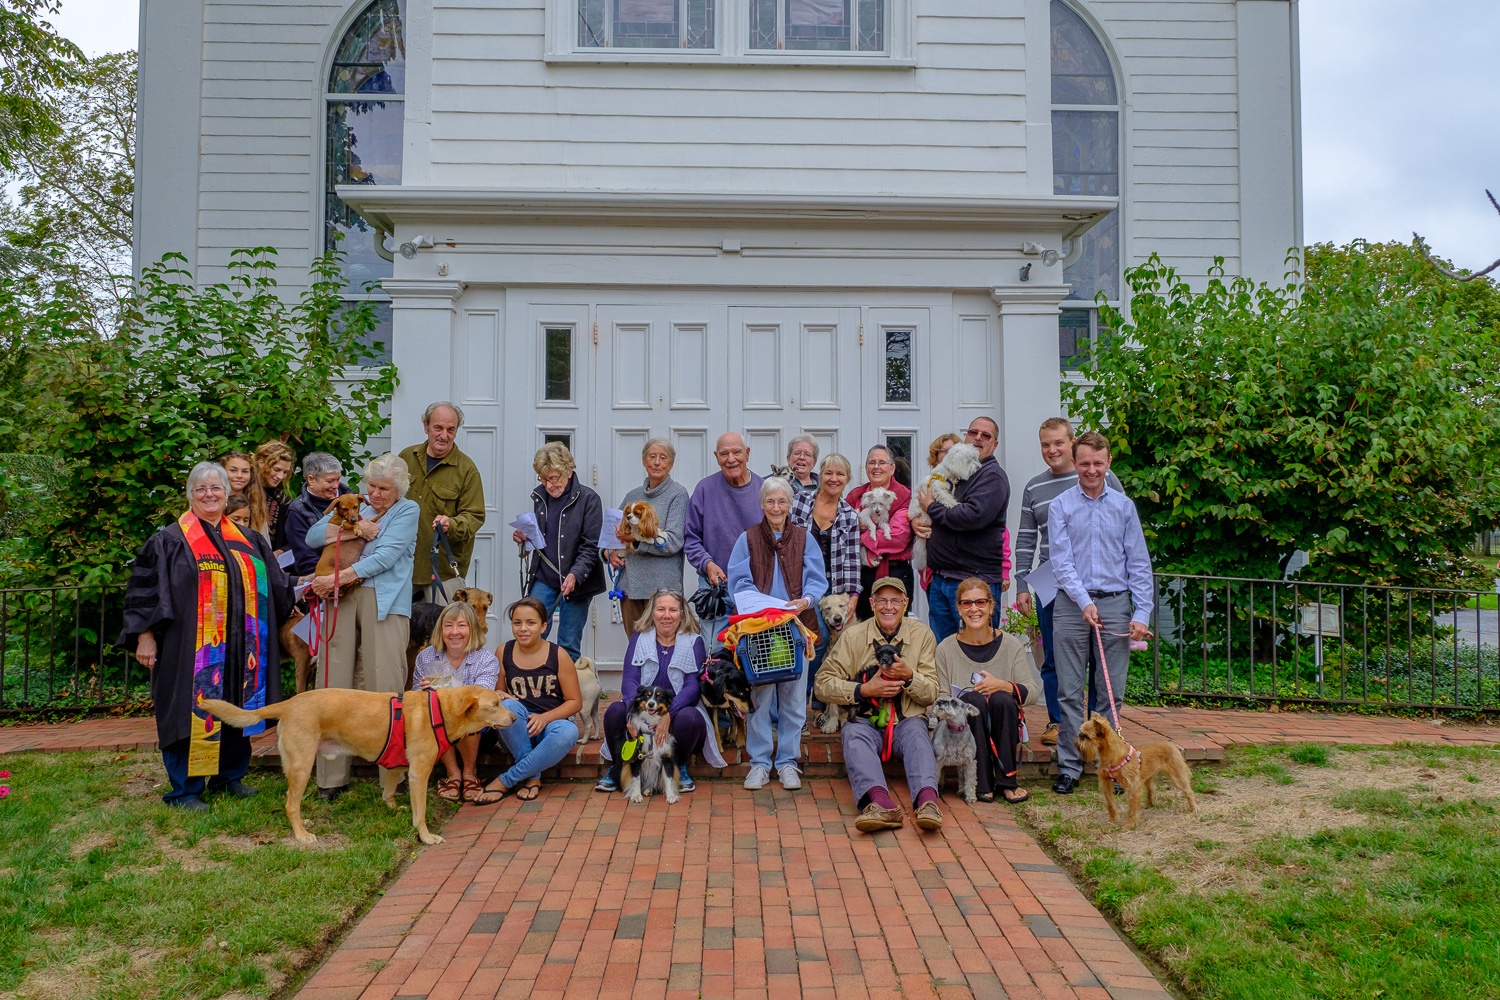 The animals and their owners gather for the blessing of the animals at Orient Congregational Church Sunday. (Credit: Jeremy Garretson of J.G. Photography)